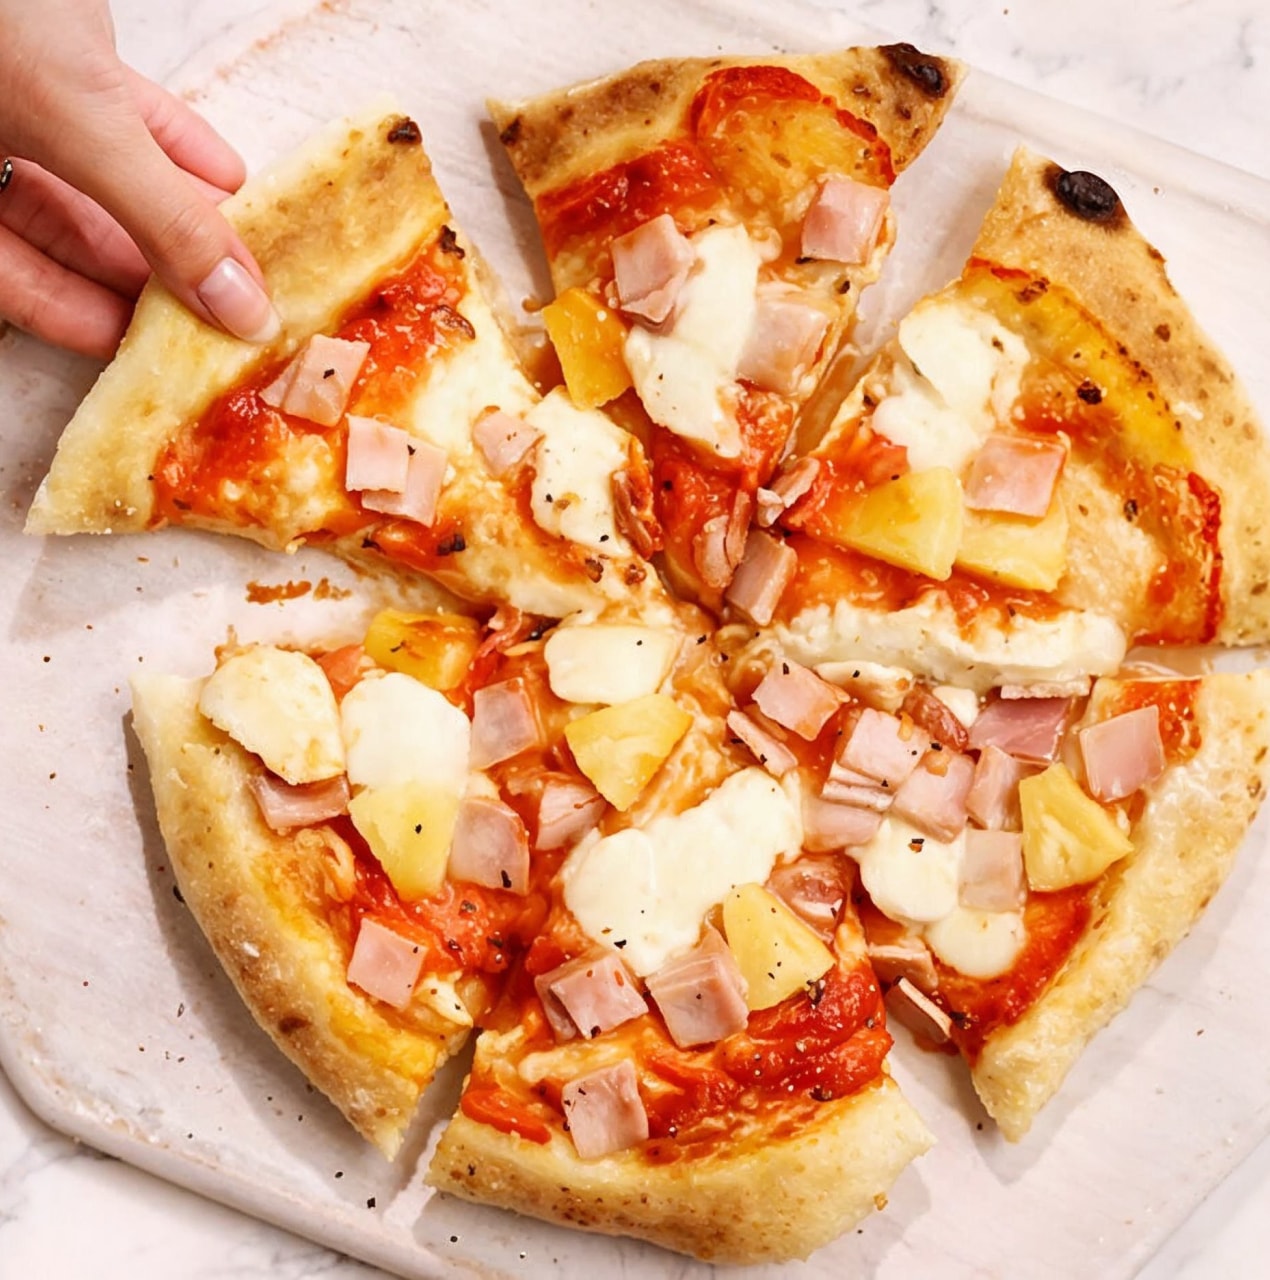 A delicious ham, pineapple and mozzarella pizza made with Allinson's Strong White Bread Flour and Yeast products